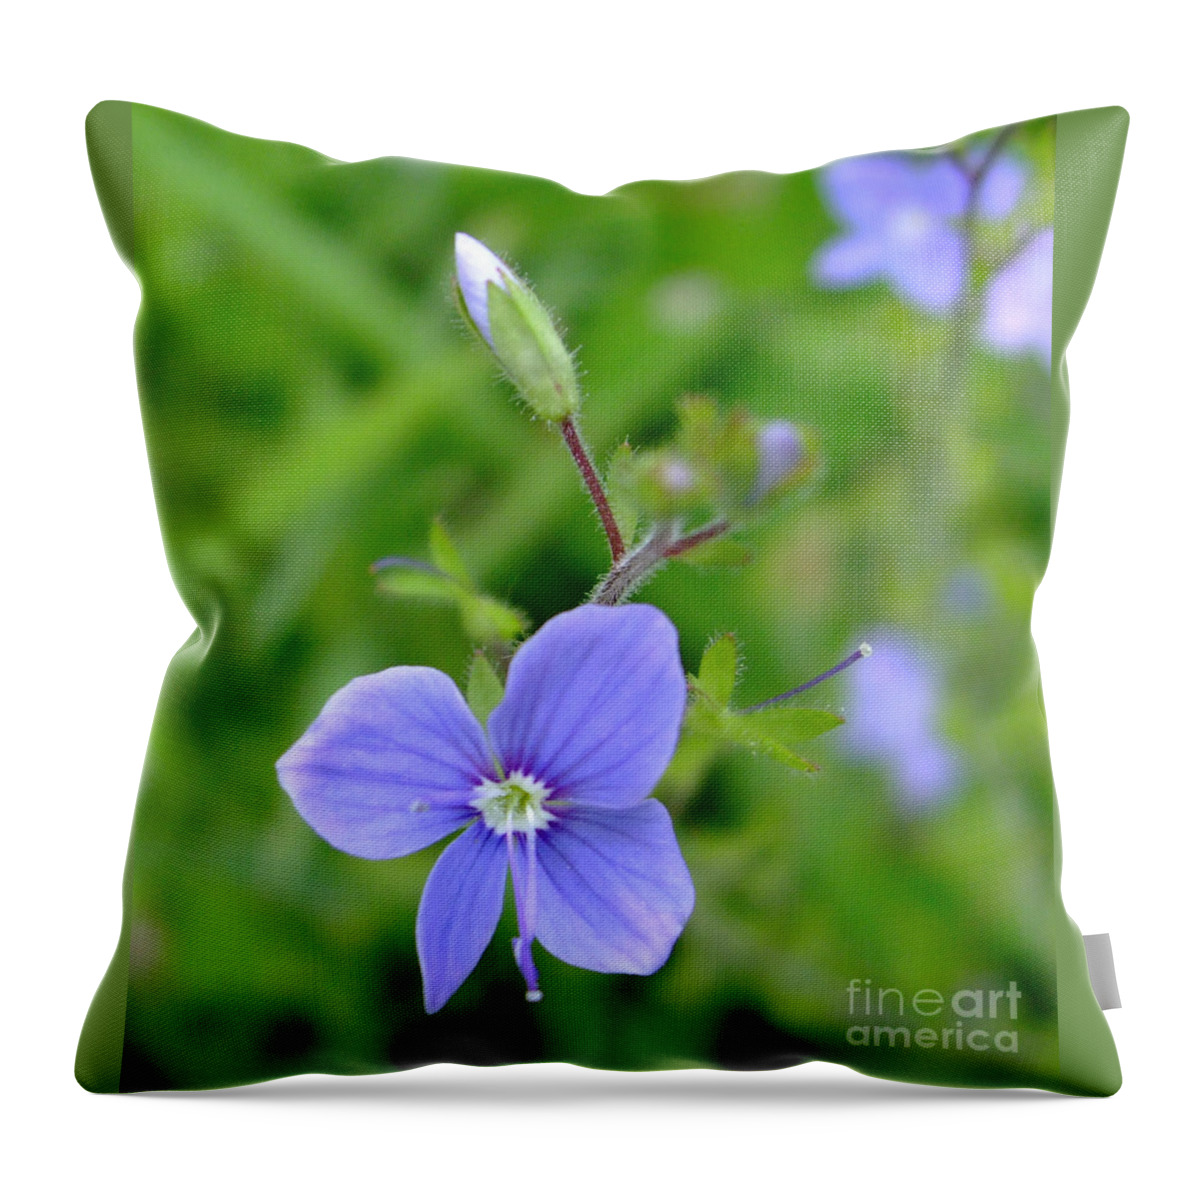 Lilac Throw Pillow featuring the photograph Lilac Flower by Julia Underwood